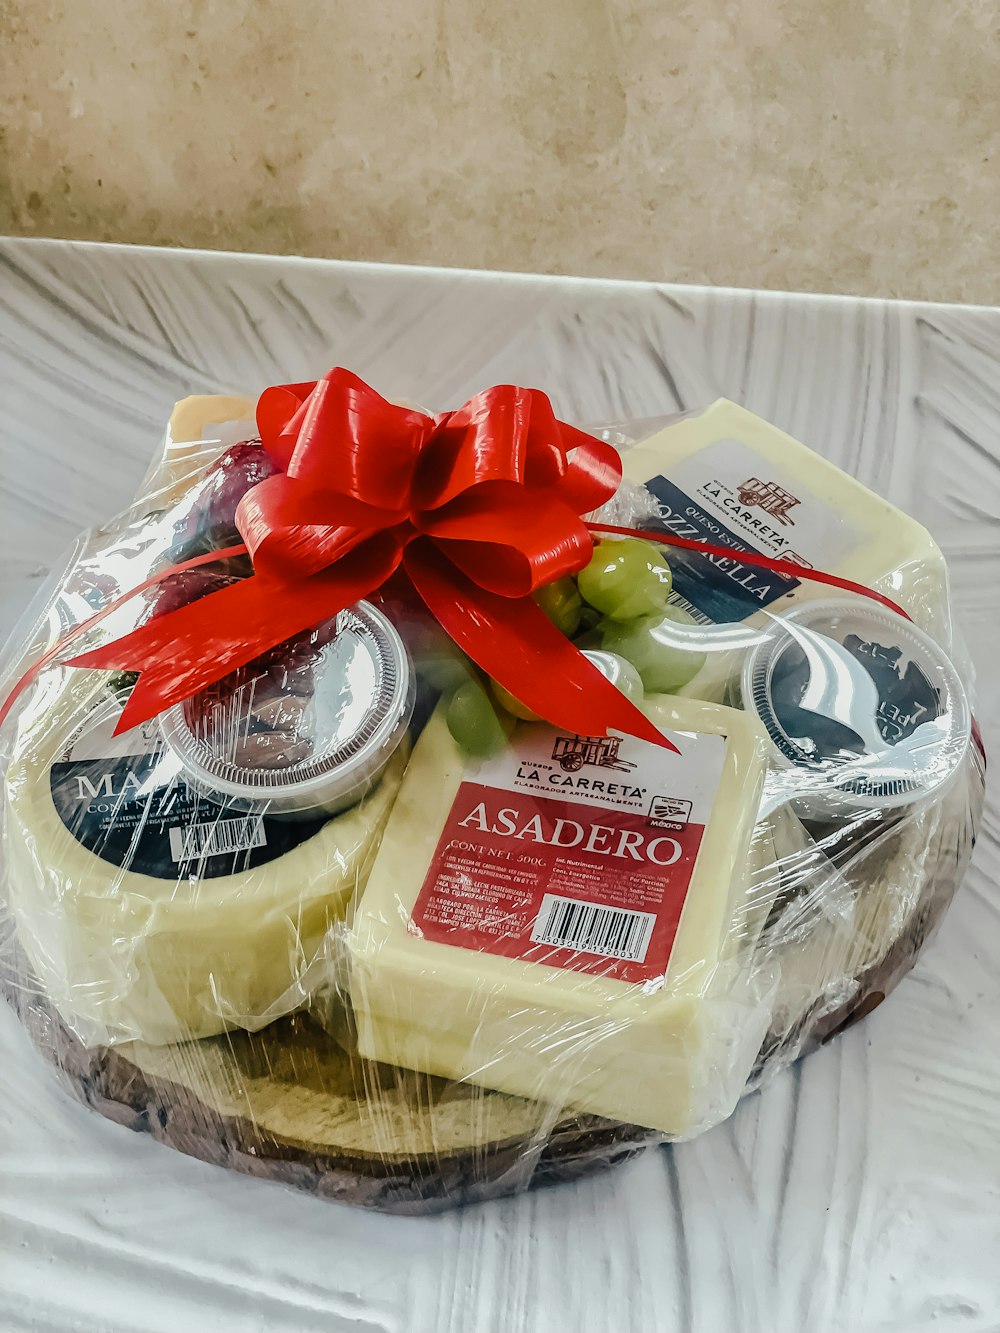 a basket of cheese with a red bow on top of it